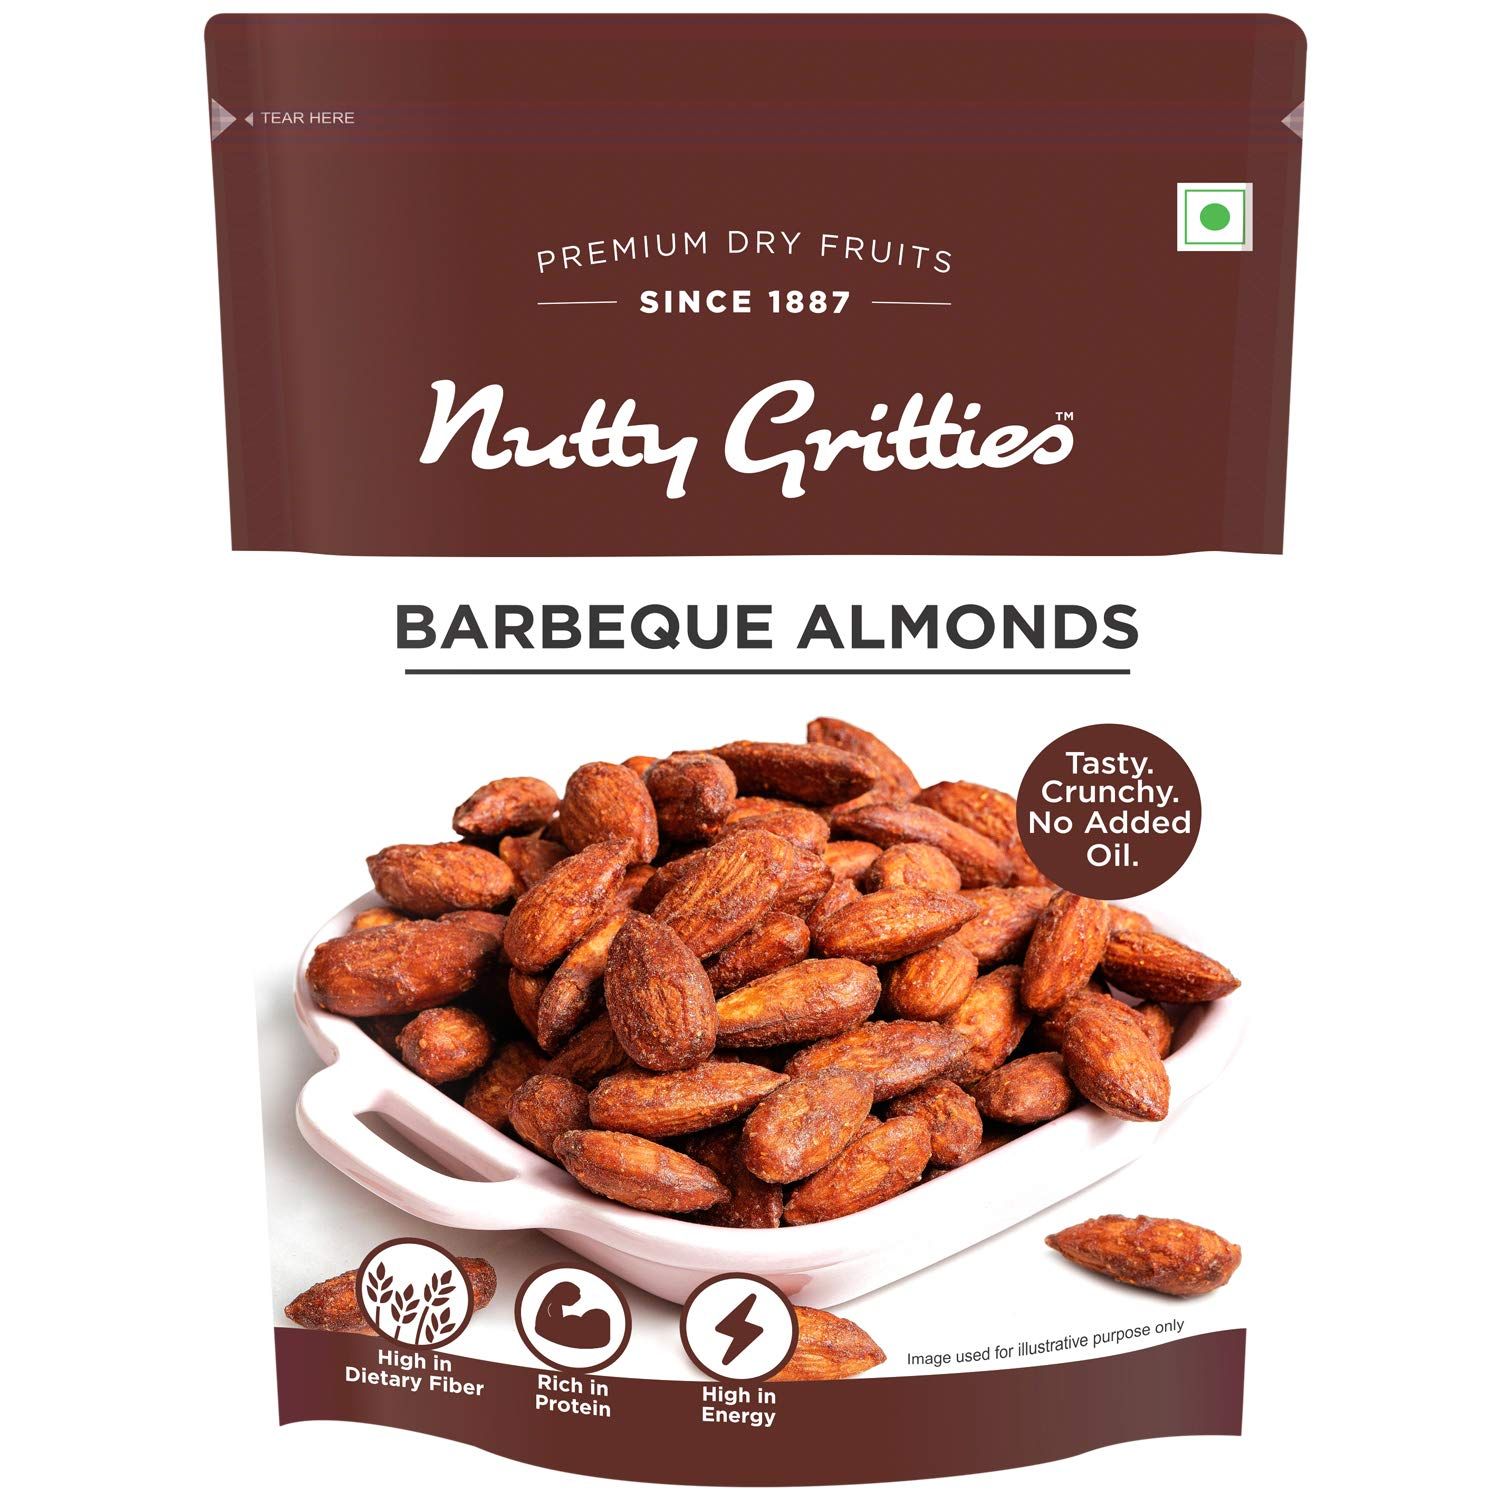 Nutty Gritties Barbeque Almonds Image